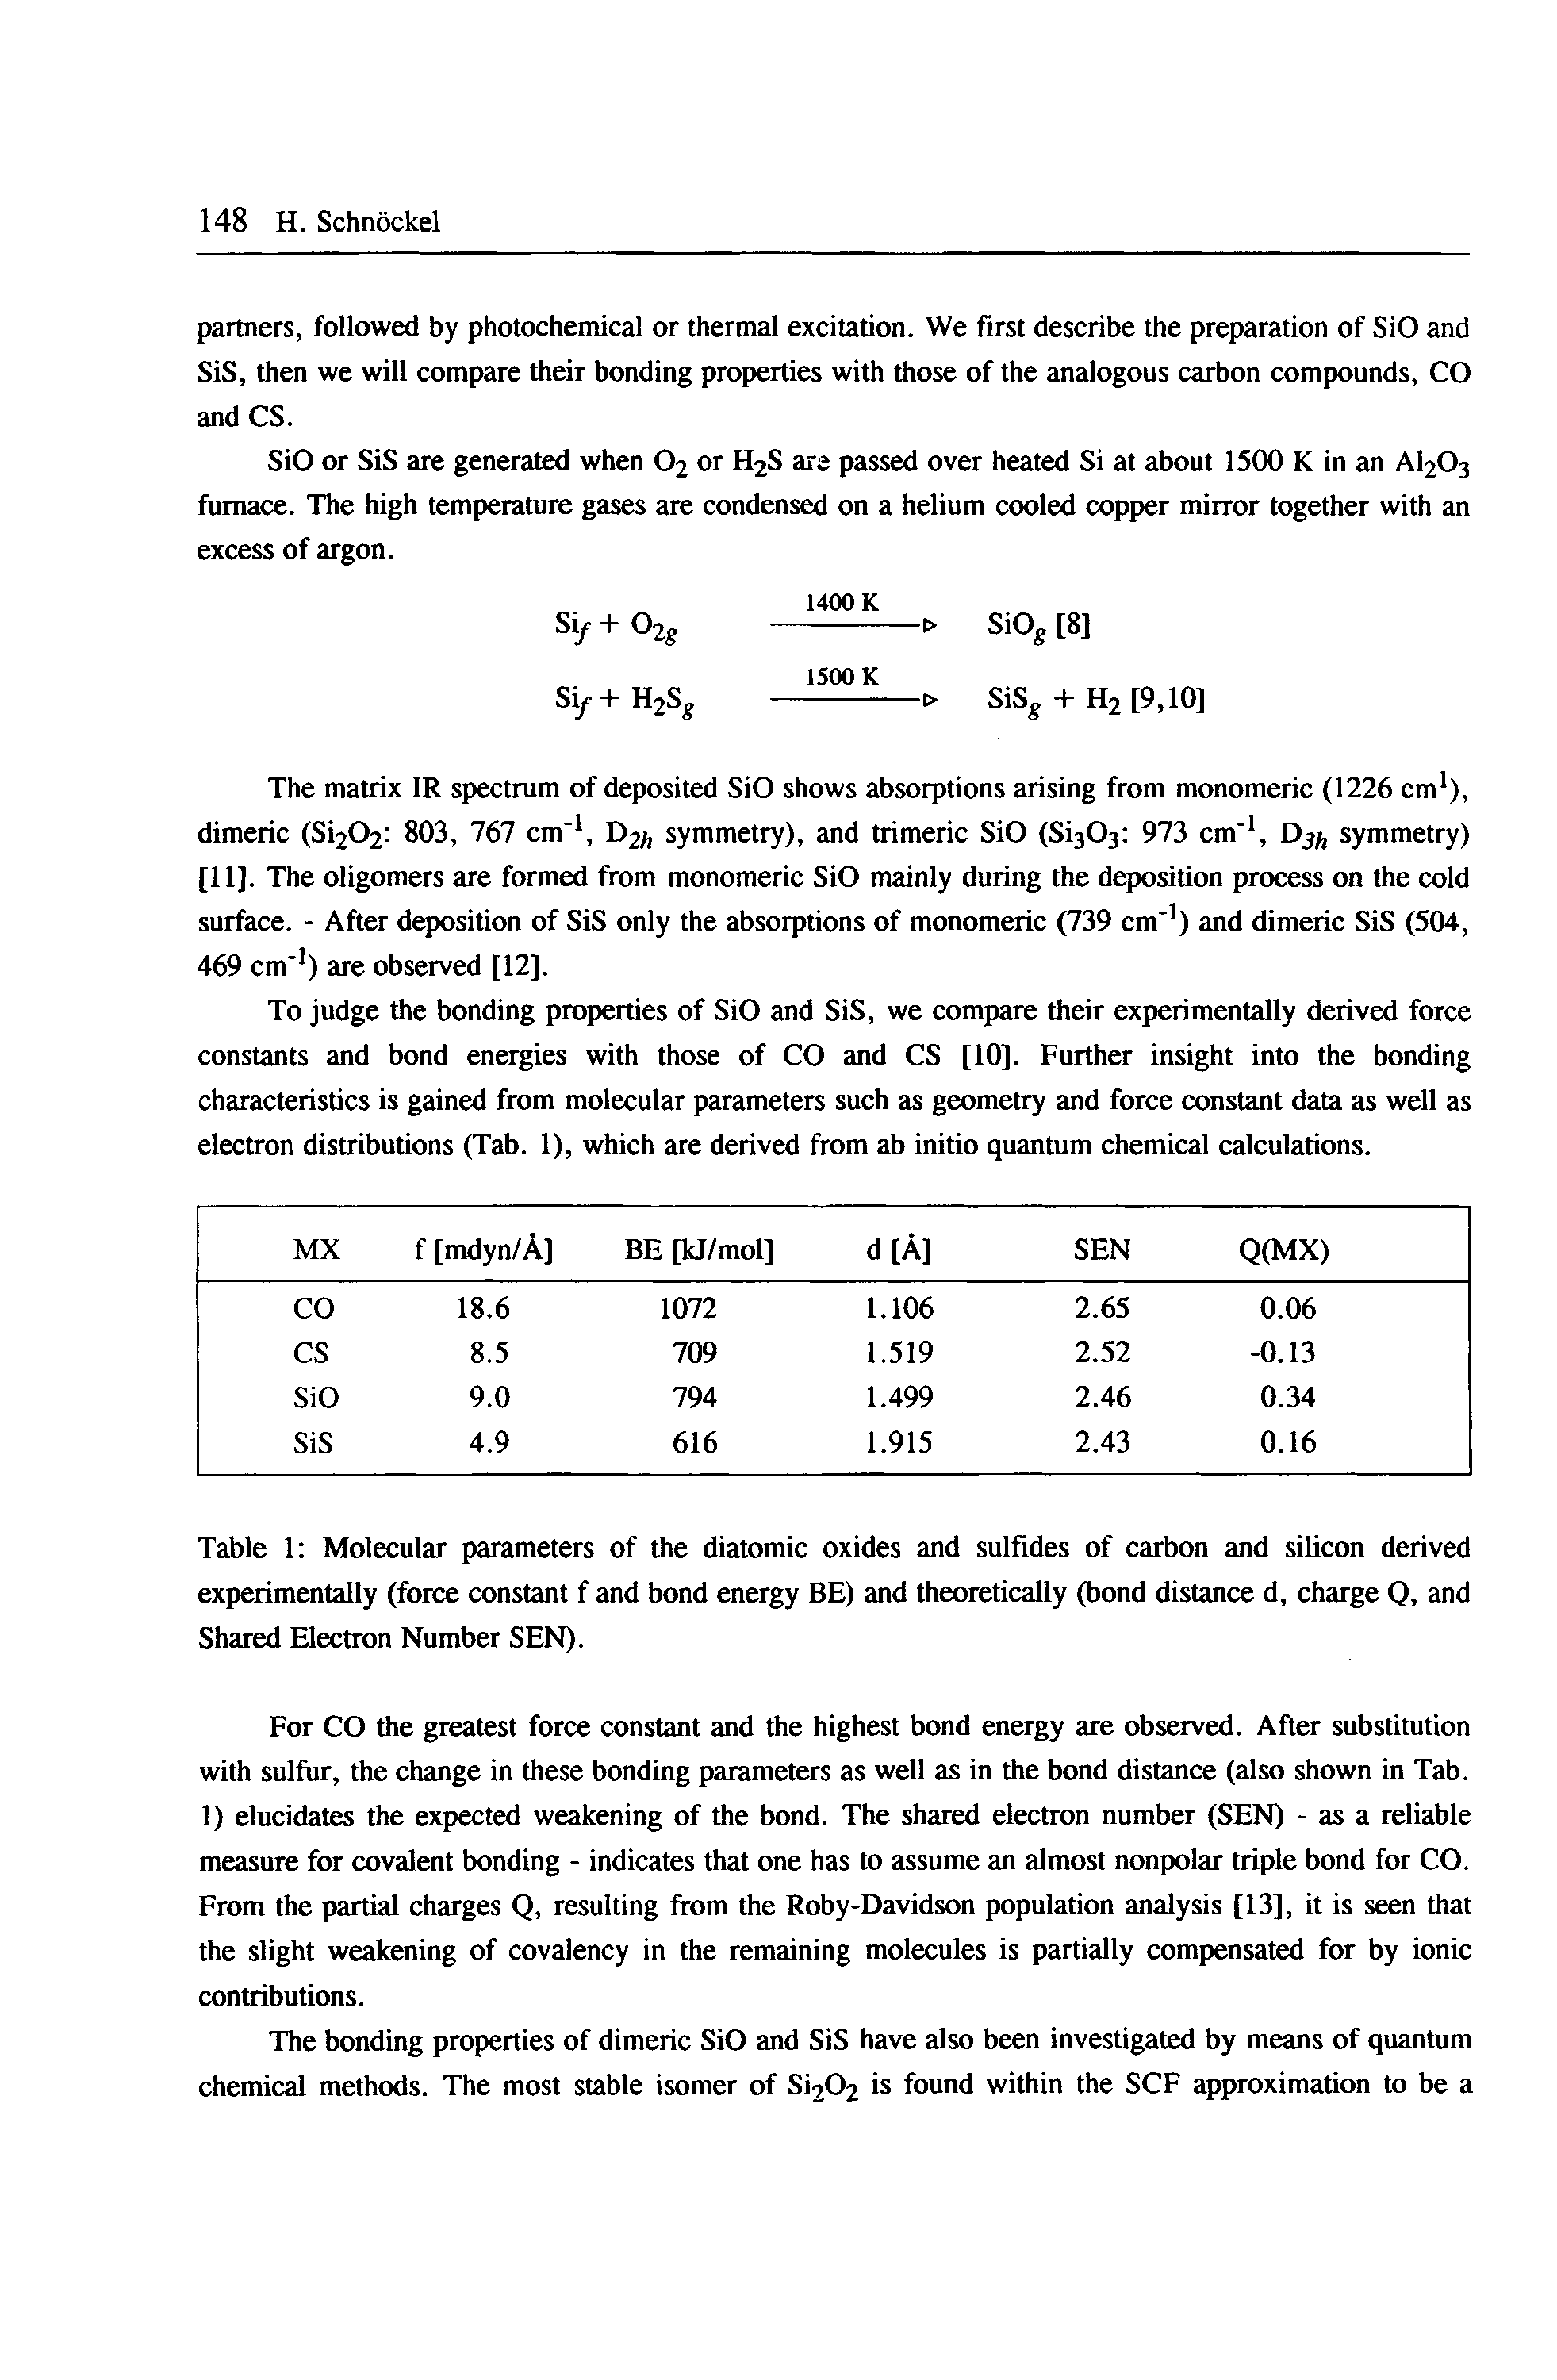 Table 1 Molecular parameters of the diatomic oxides and sulfides of carbon and silicon derived experimentally (force constant f and bond energy BE) and theoretically (bond distance d, charge Q, and Shared Electron Number SEN).